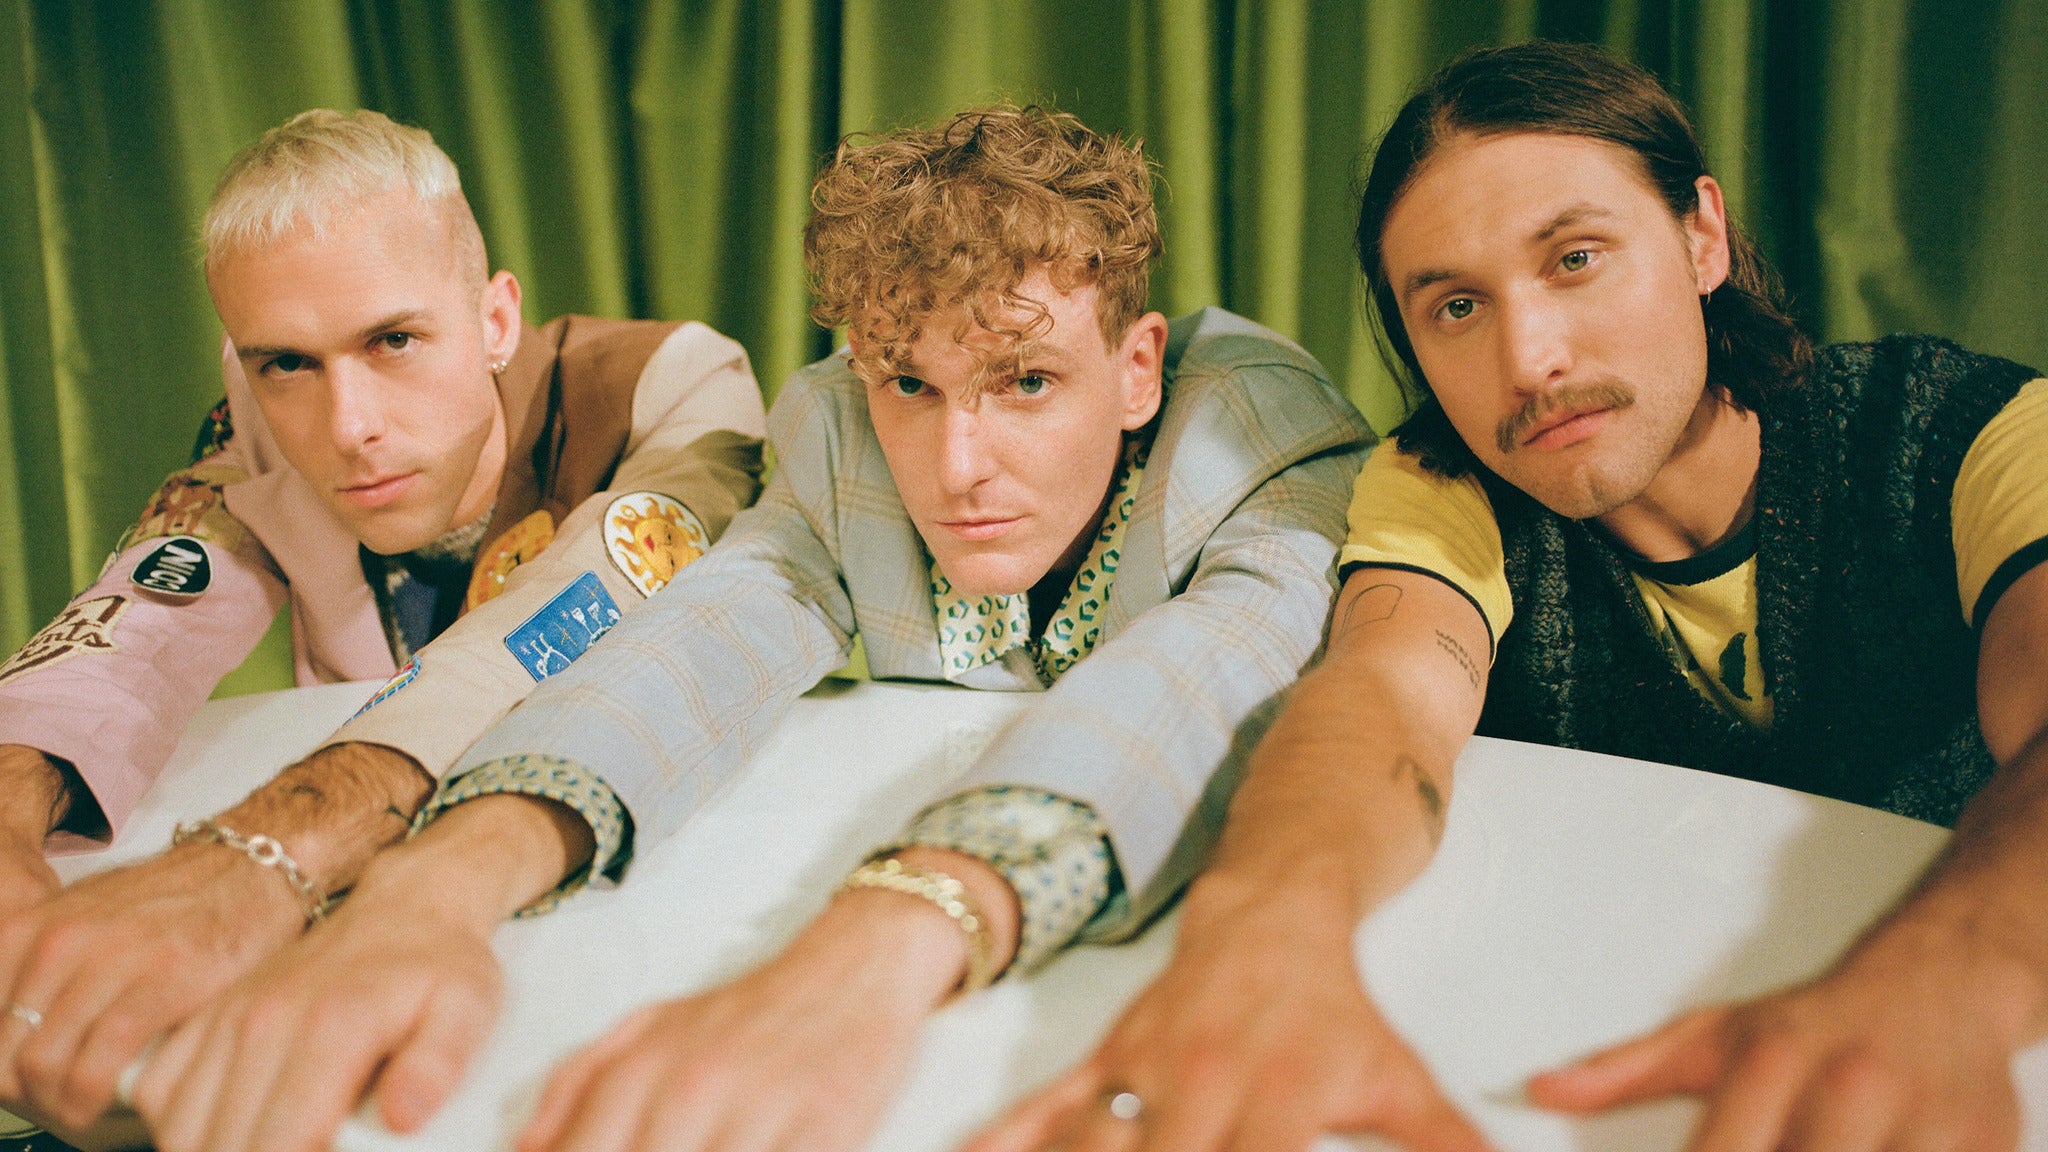 COIN: Rainbow Dreamland Tour in Baltimore promo photo for Ticketmaster presale offer code